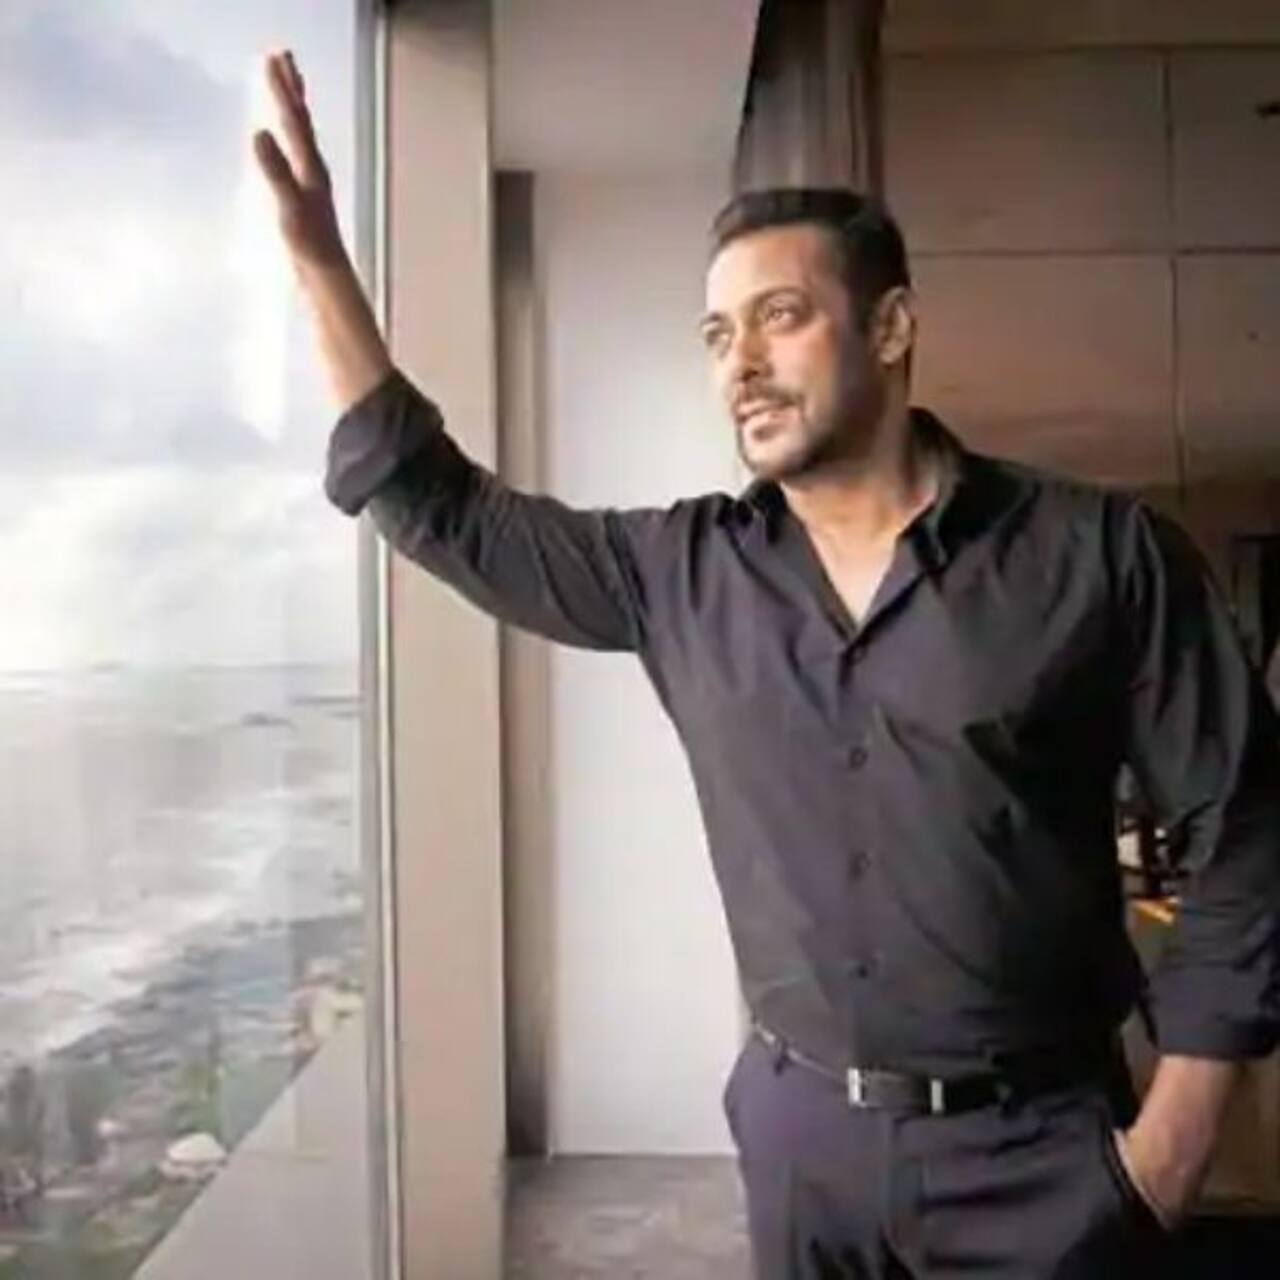 'Iss waqt main Galaxy mein nahi hun,' Salman Khan asks fans to not gather outside his residence on his birthday